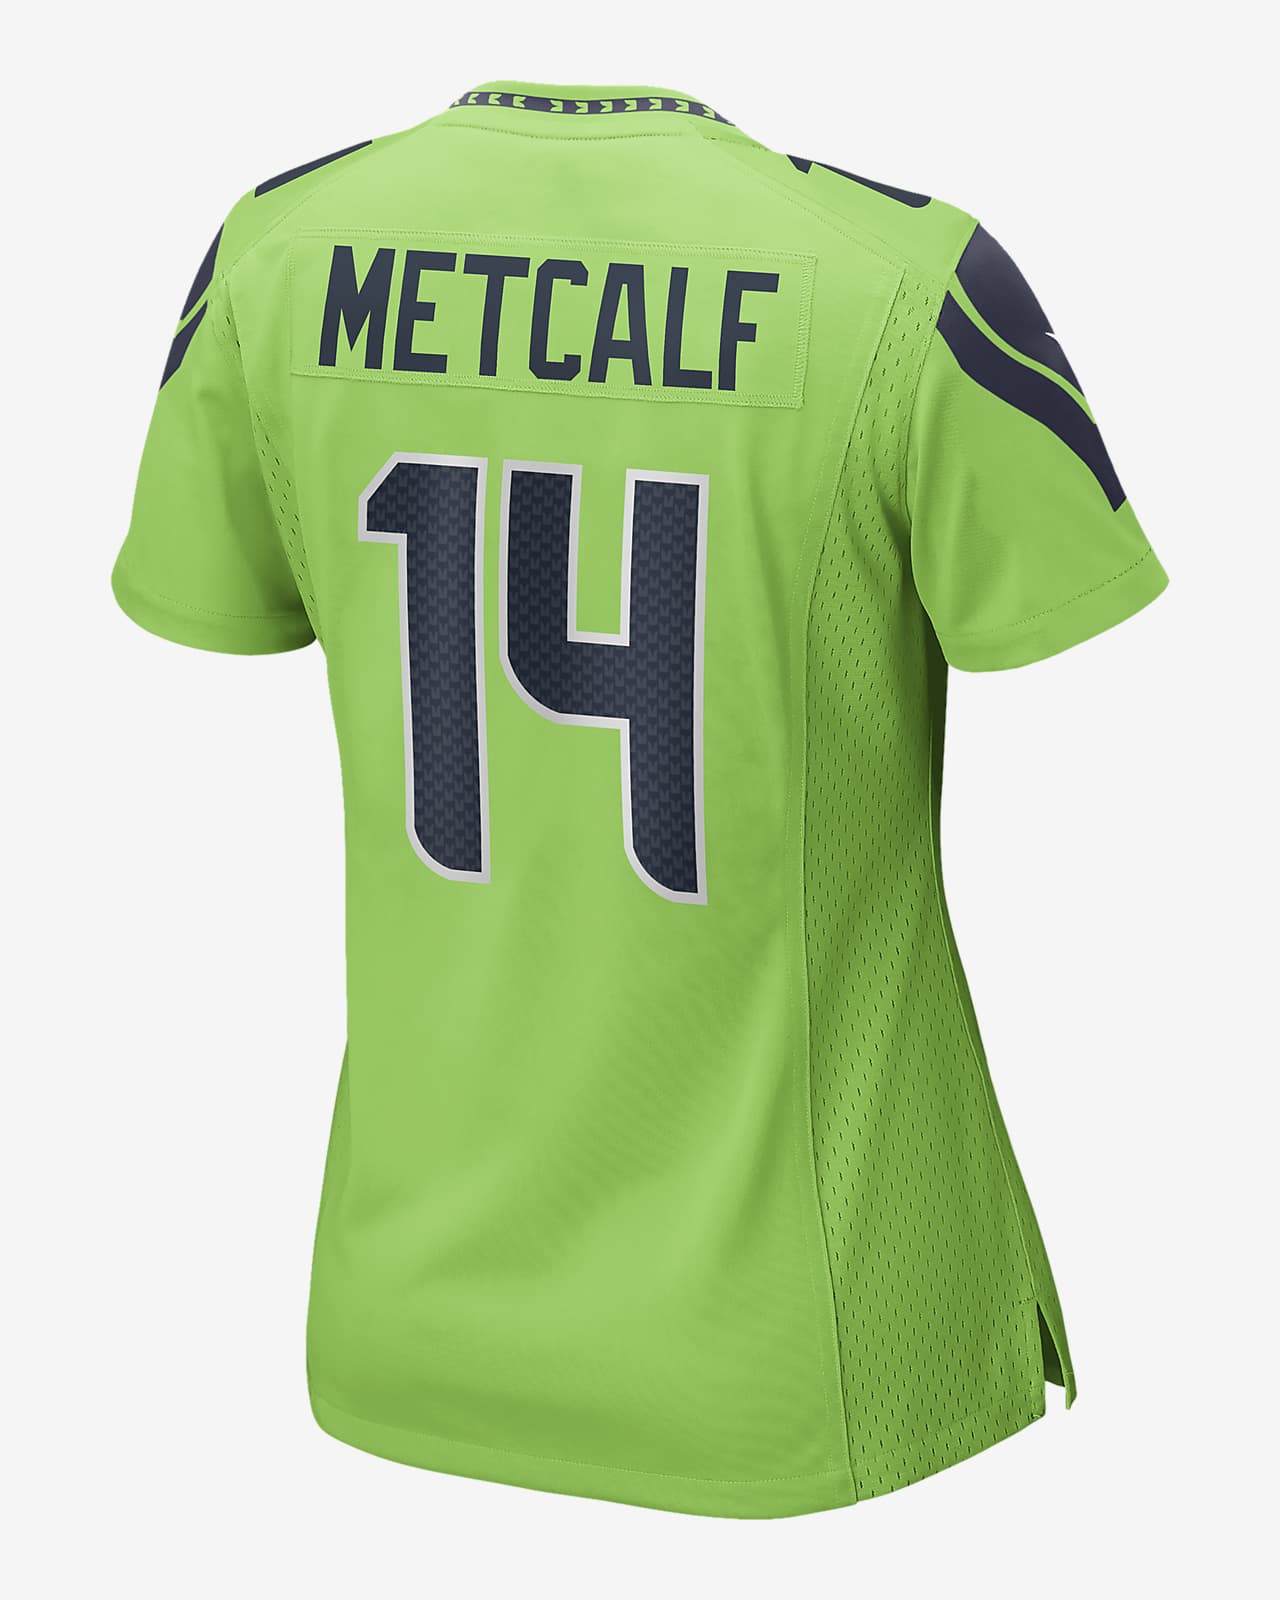 Game Women's D.K. Metcalf White Road Jersey - #14 Football Seattle Seahawks  Size S